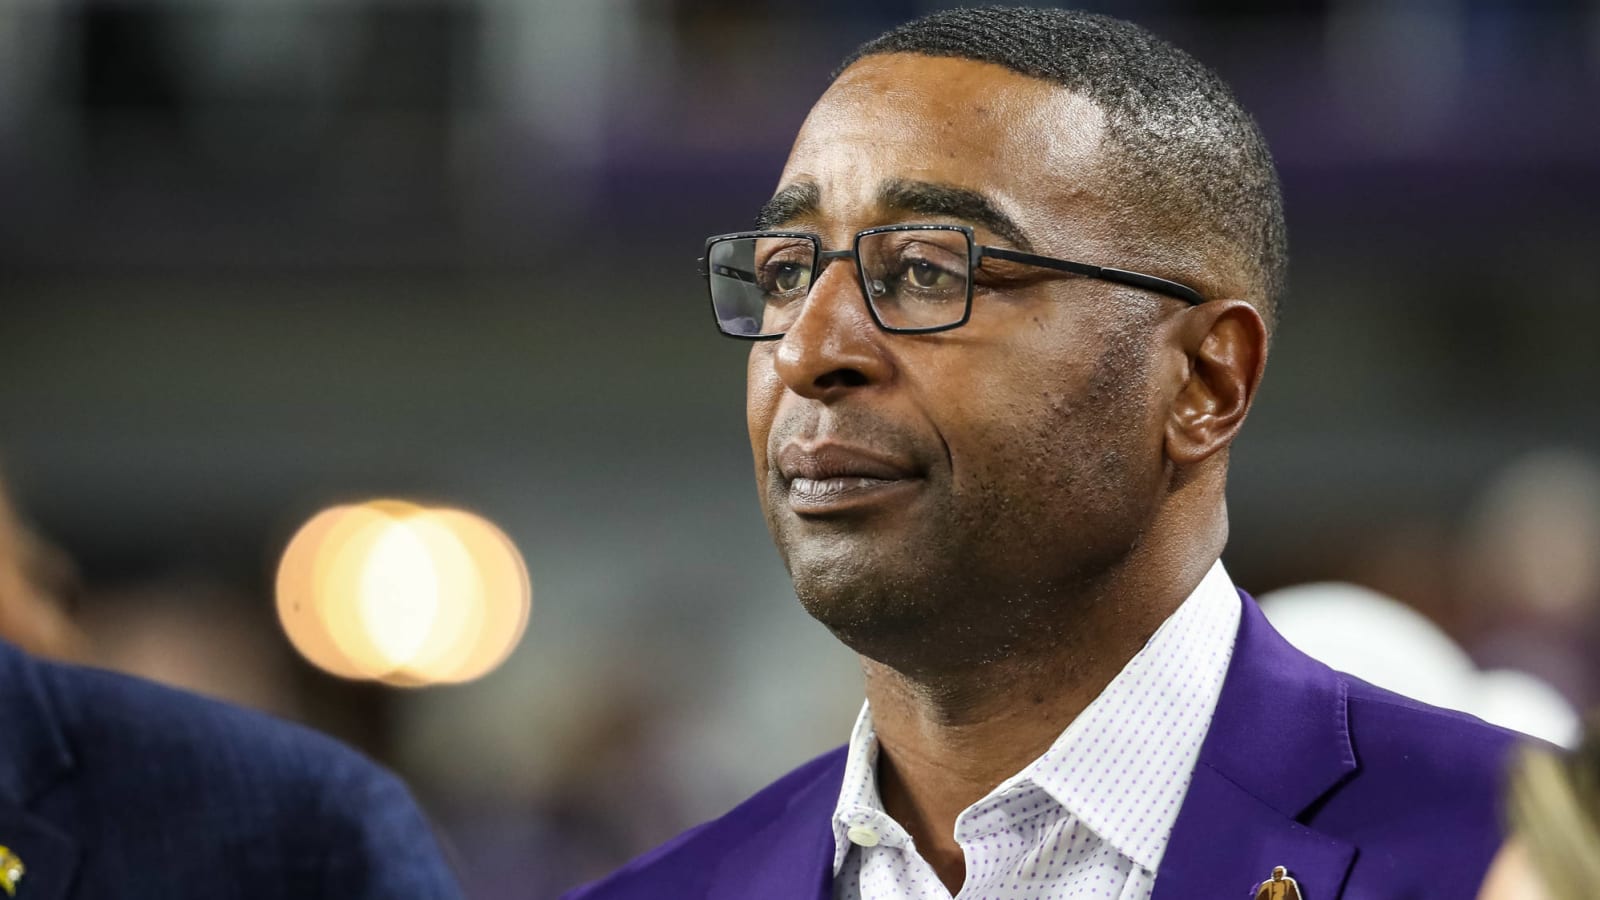 Cris Carter opens up about illegal college benefits, drug use